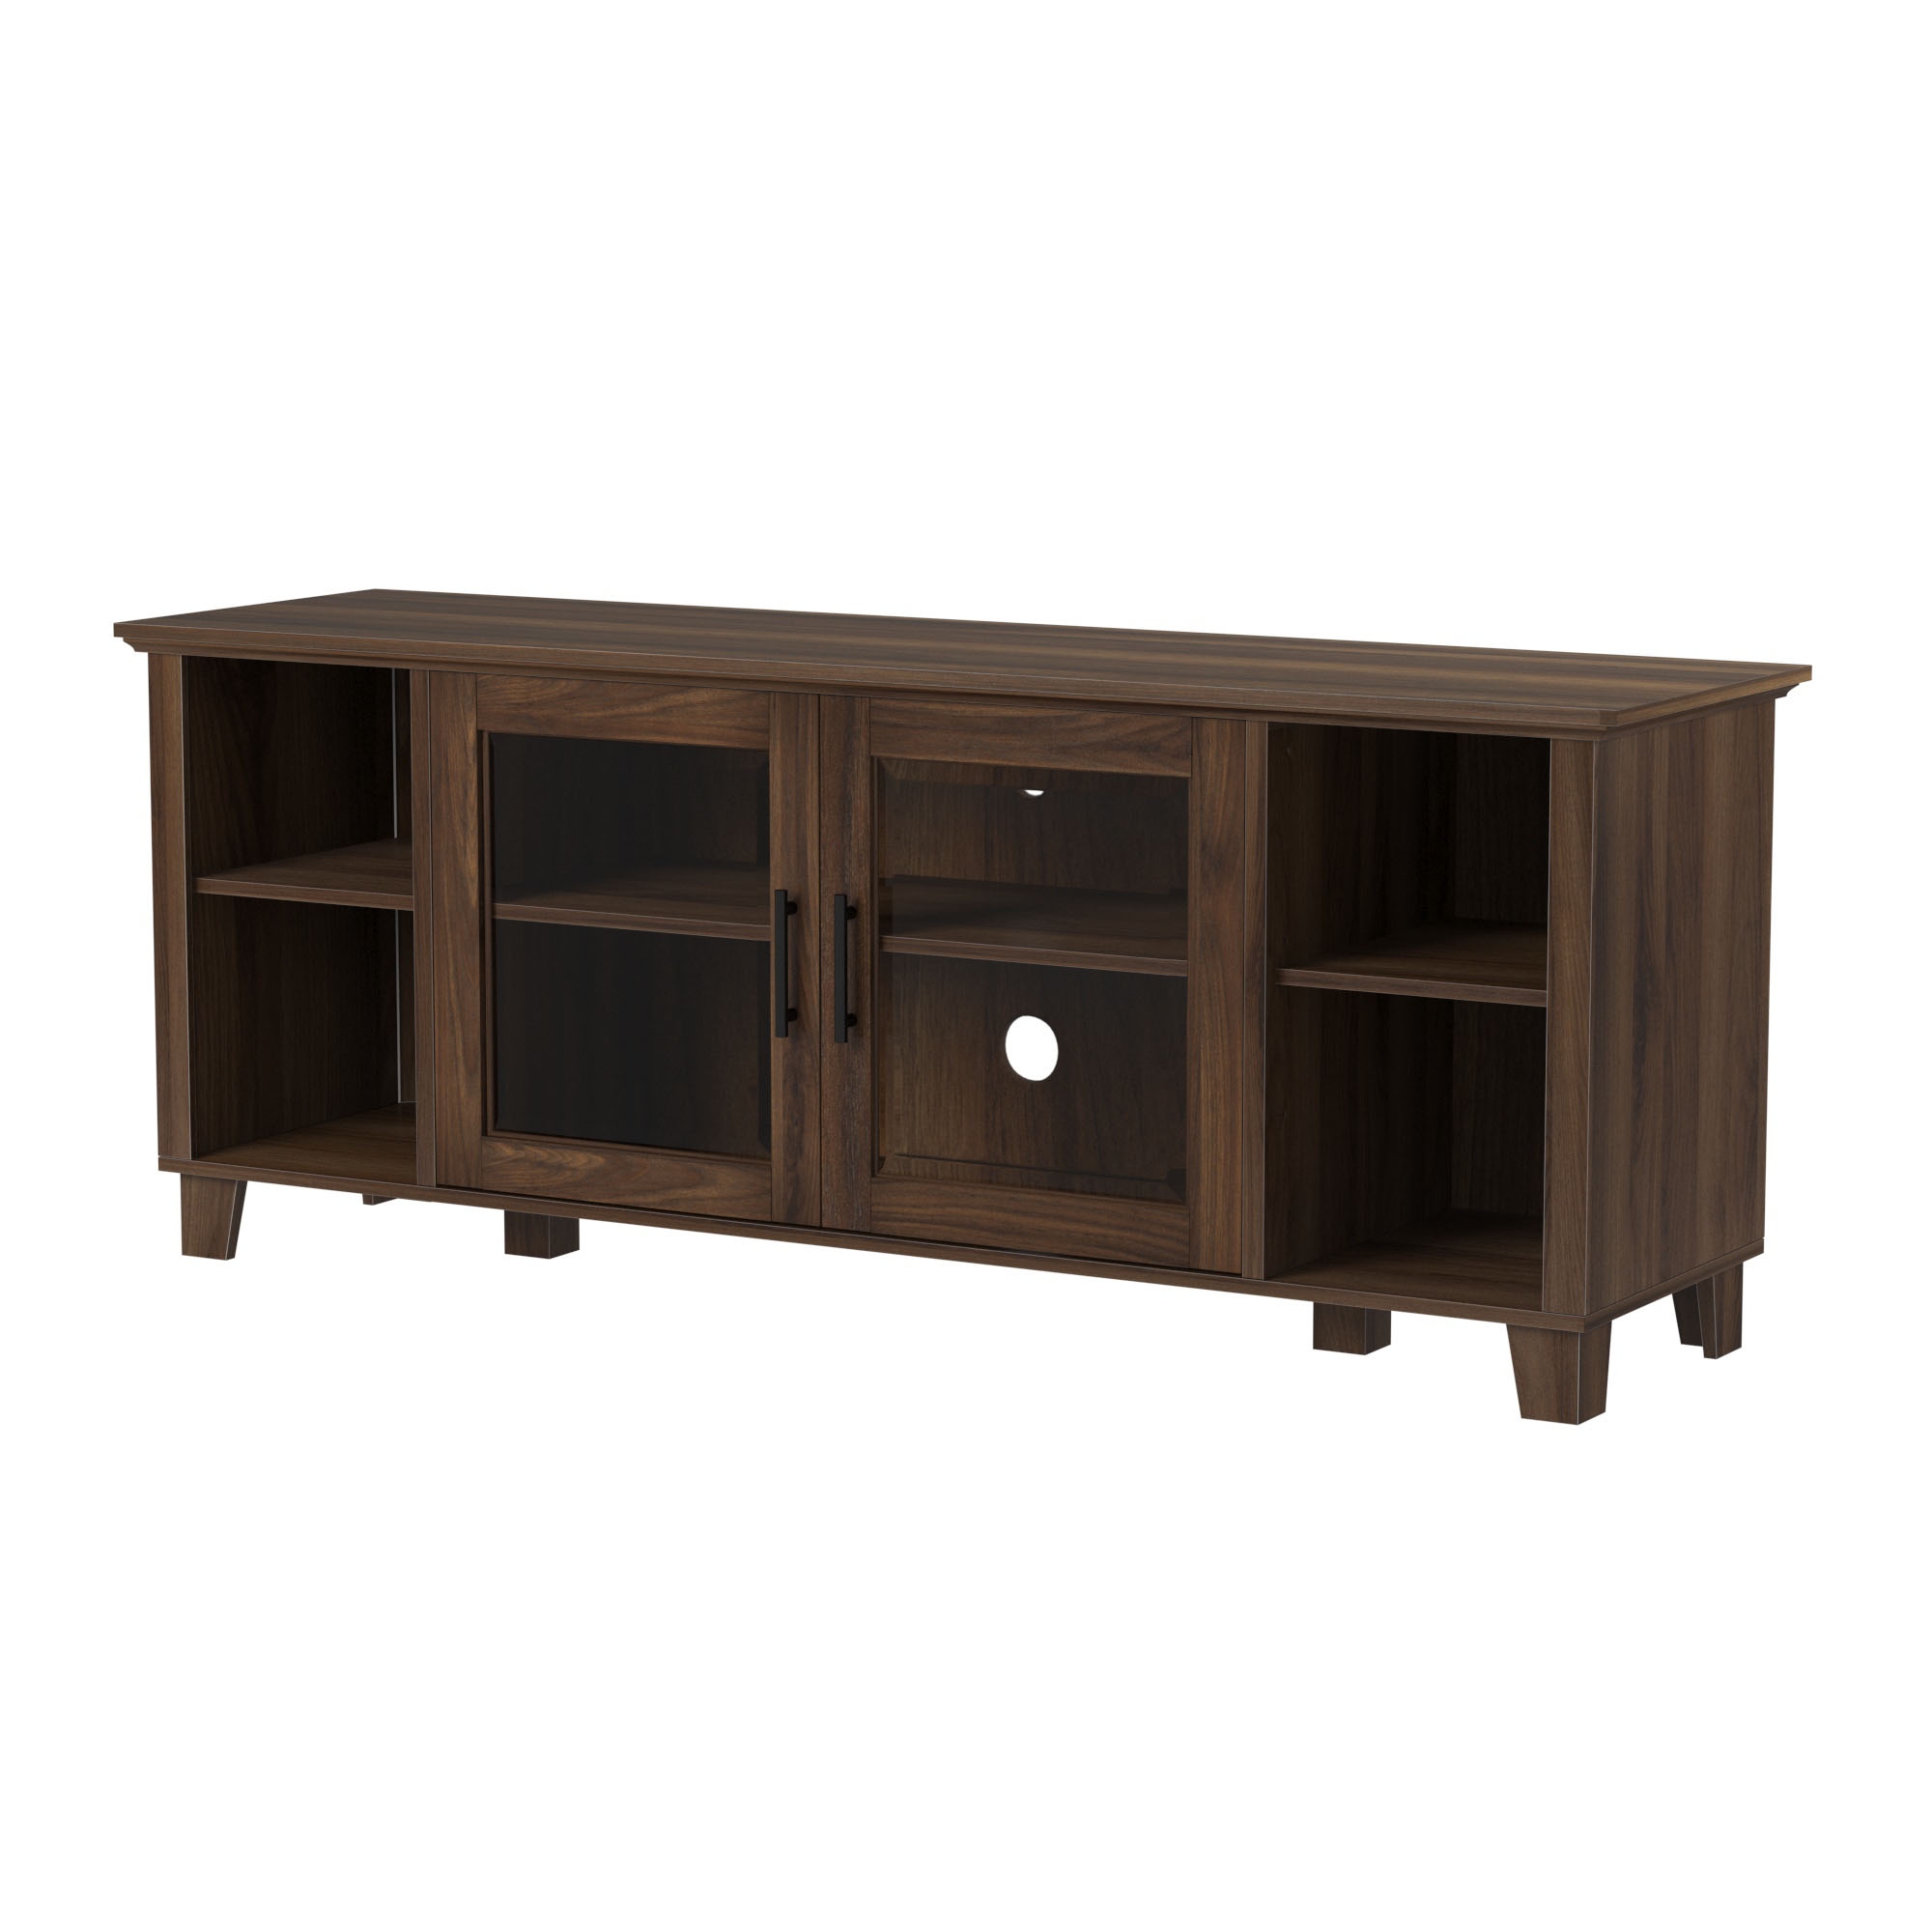 Columbus 58" TV Stand with Middle Doors - Dark Walnut - Image 2